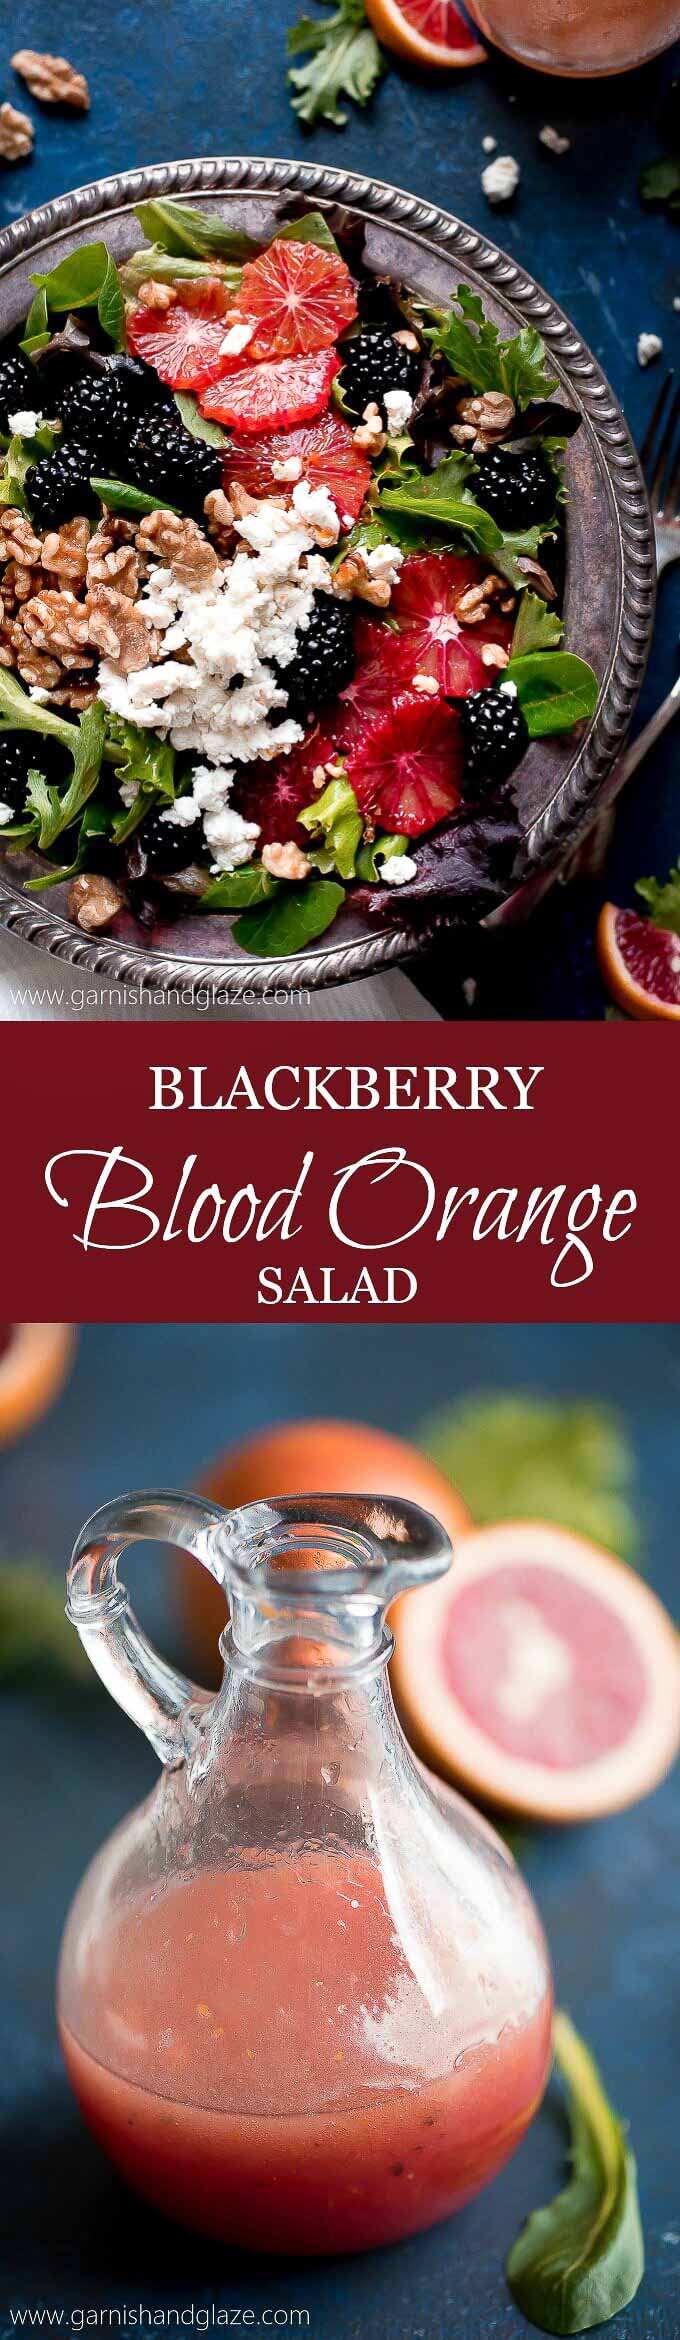 Grab a bowl of this BLACKBERRY BLOOD ORANGE SALAD with blood orange vinaigrette, creamy goat cheese, and toasted walnuts for a healthy and refreshing lunch!